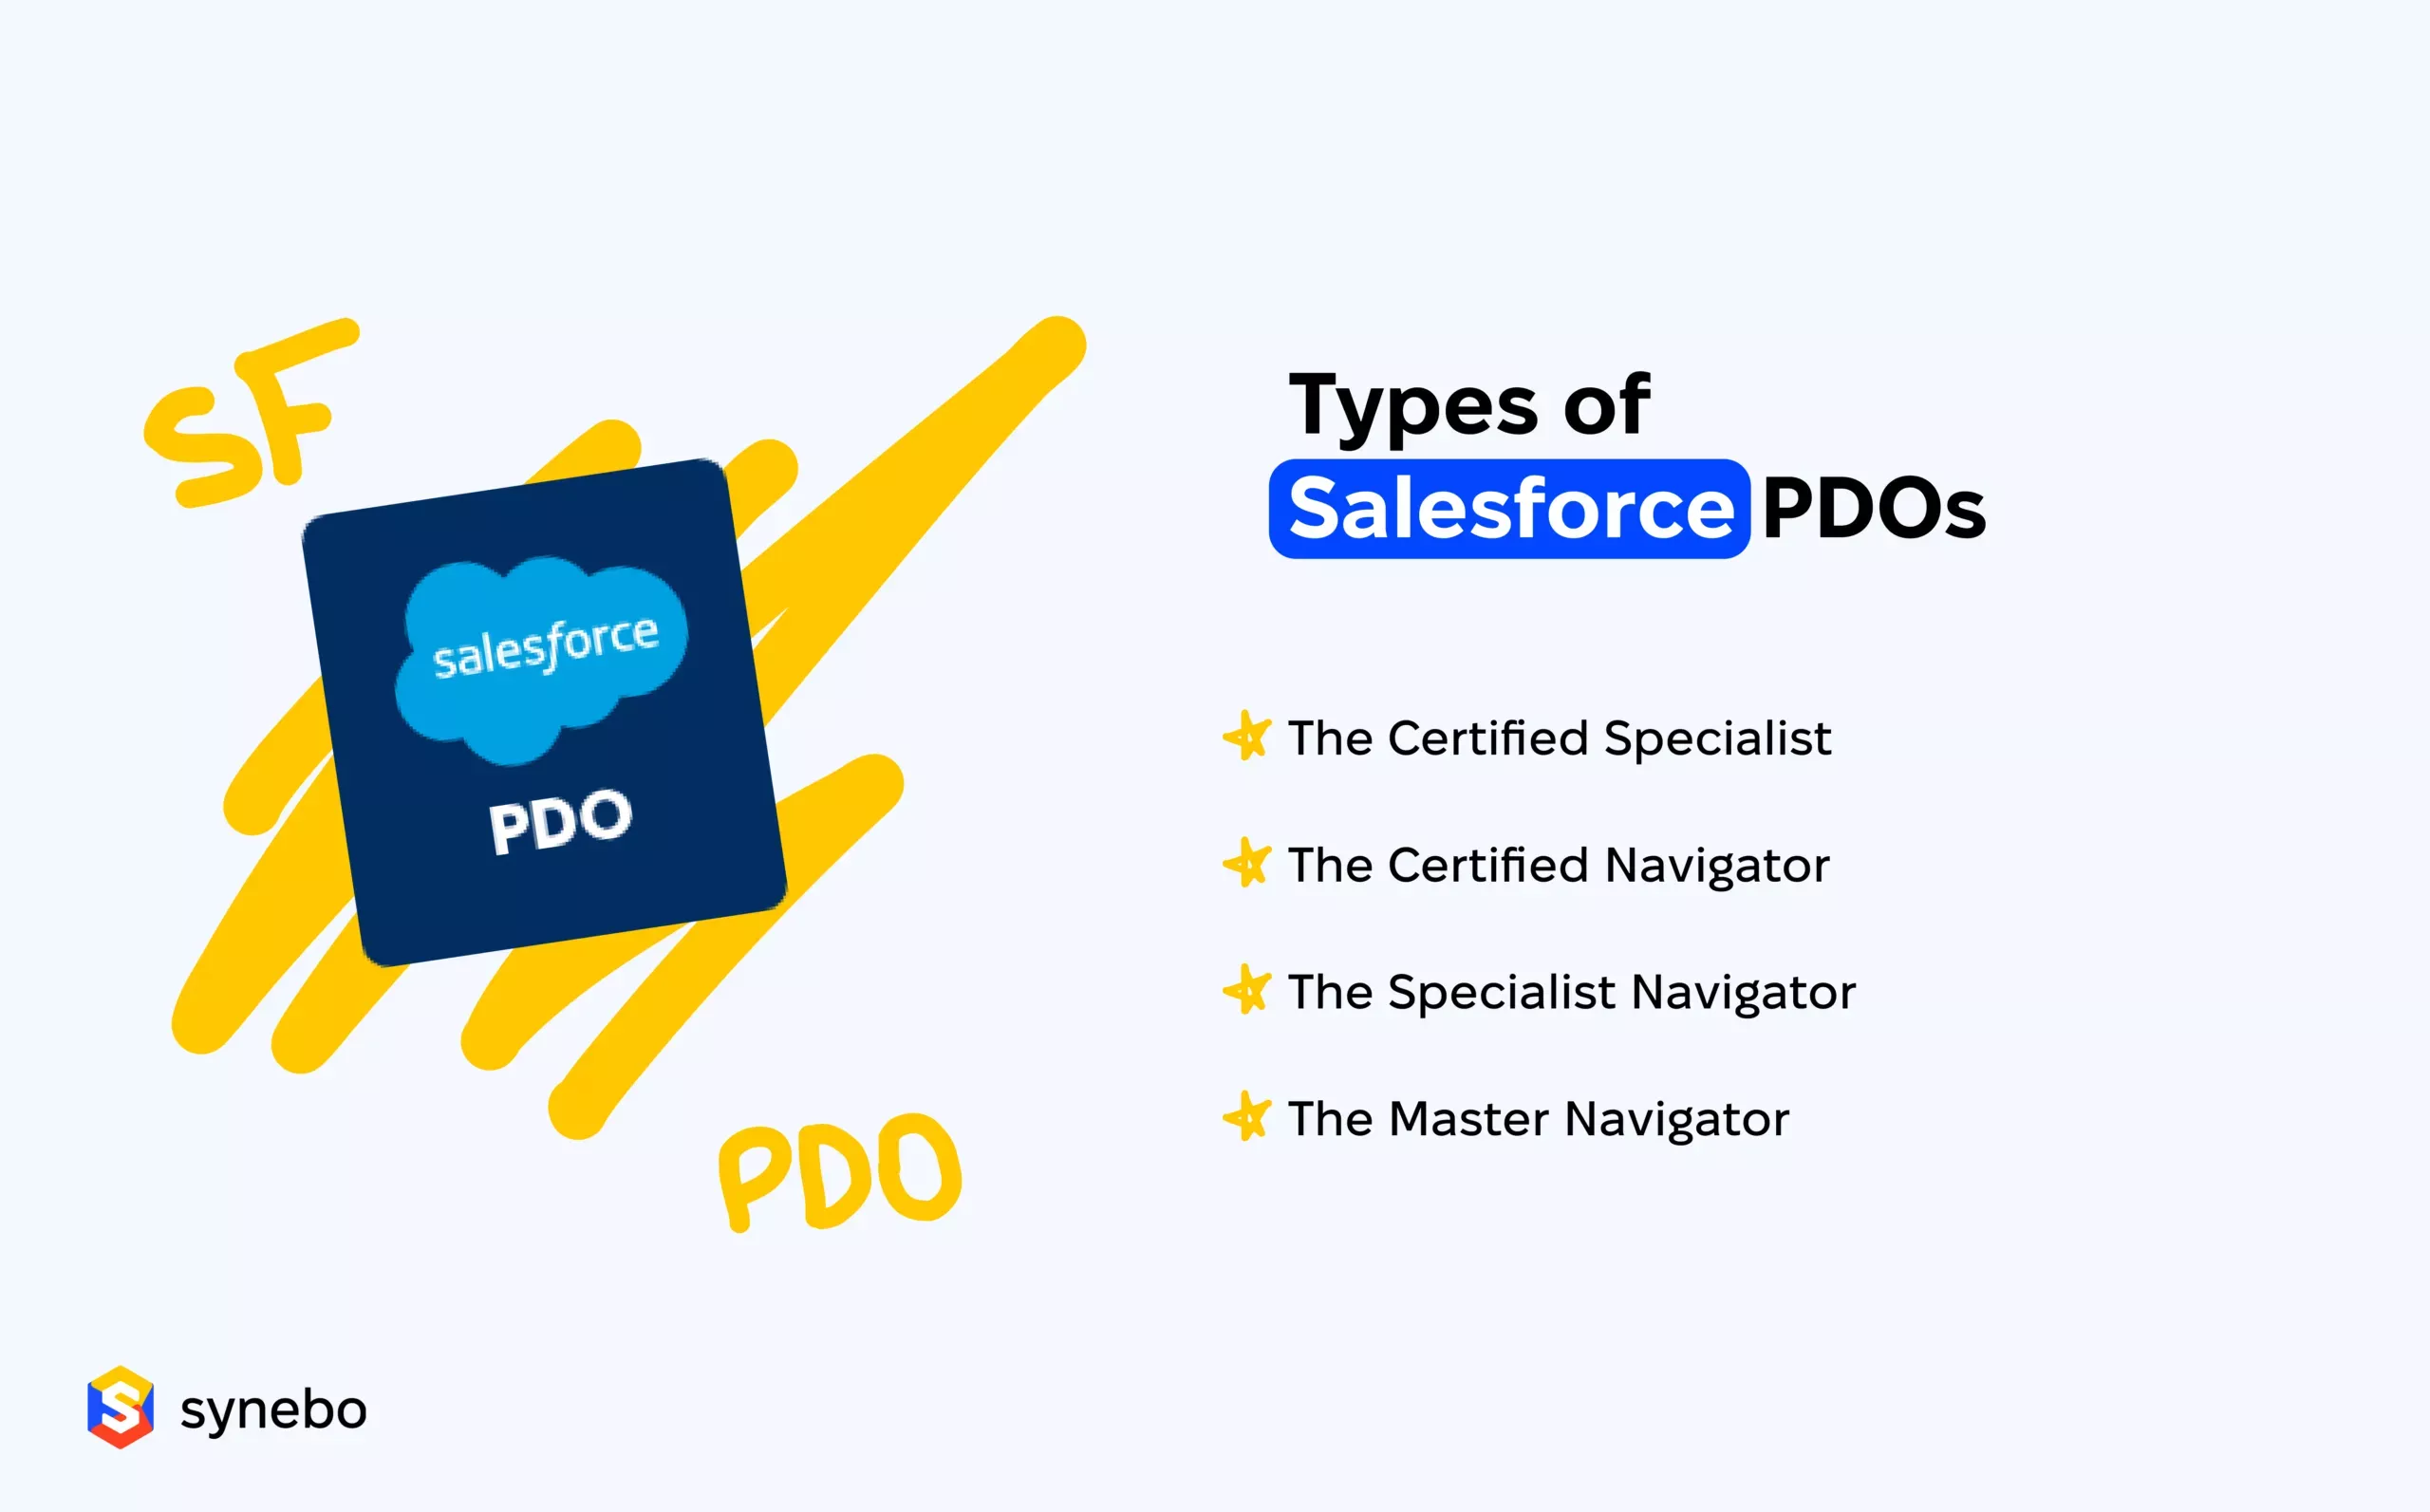 Types-of-Salesforce-PDOs-scaled